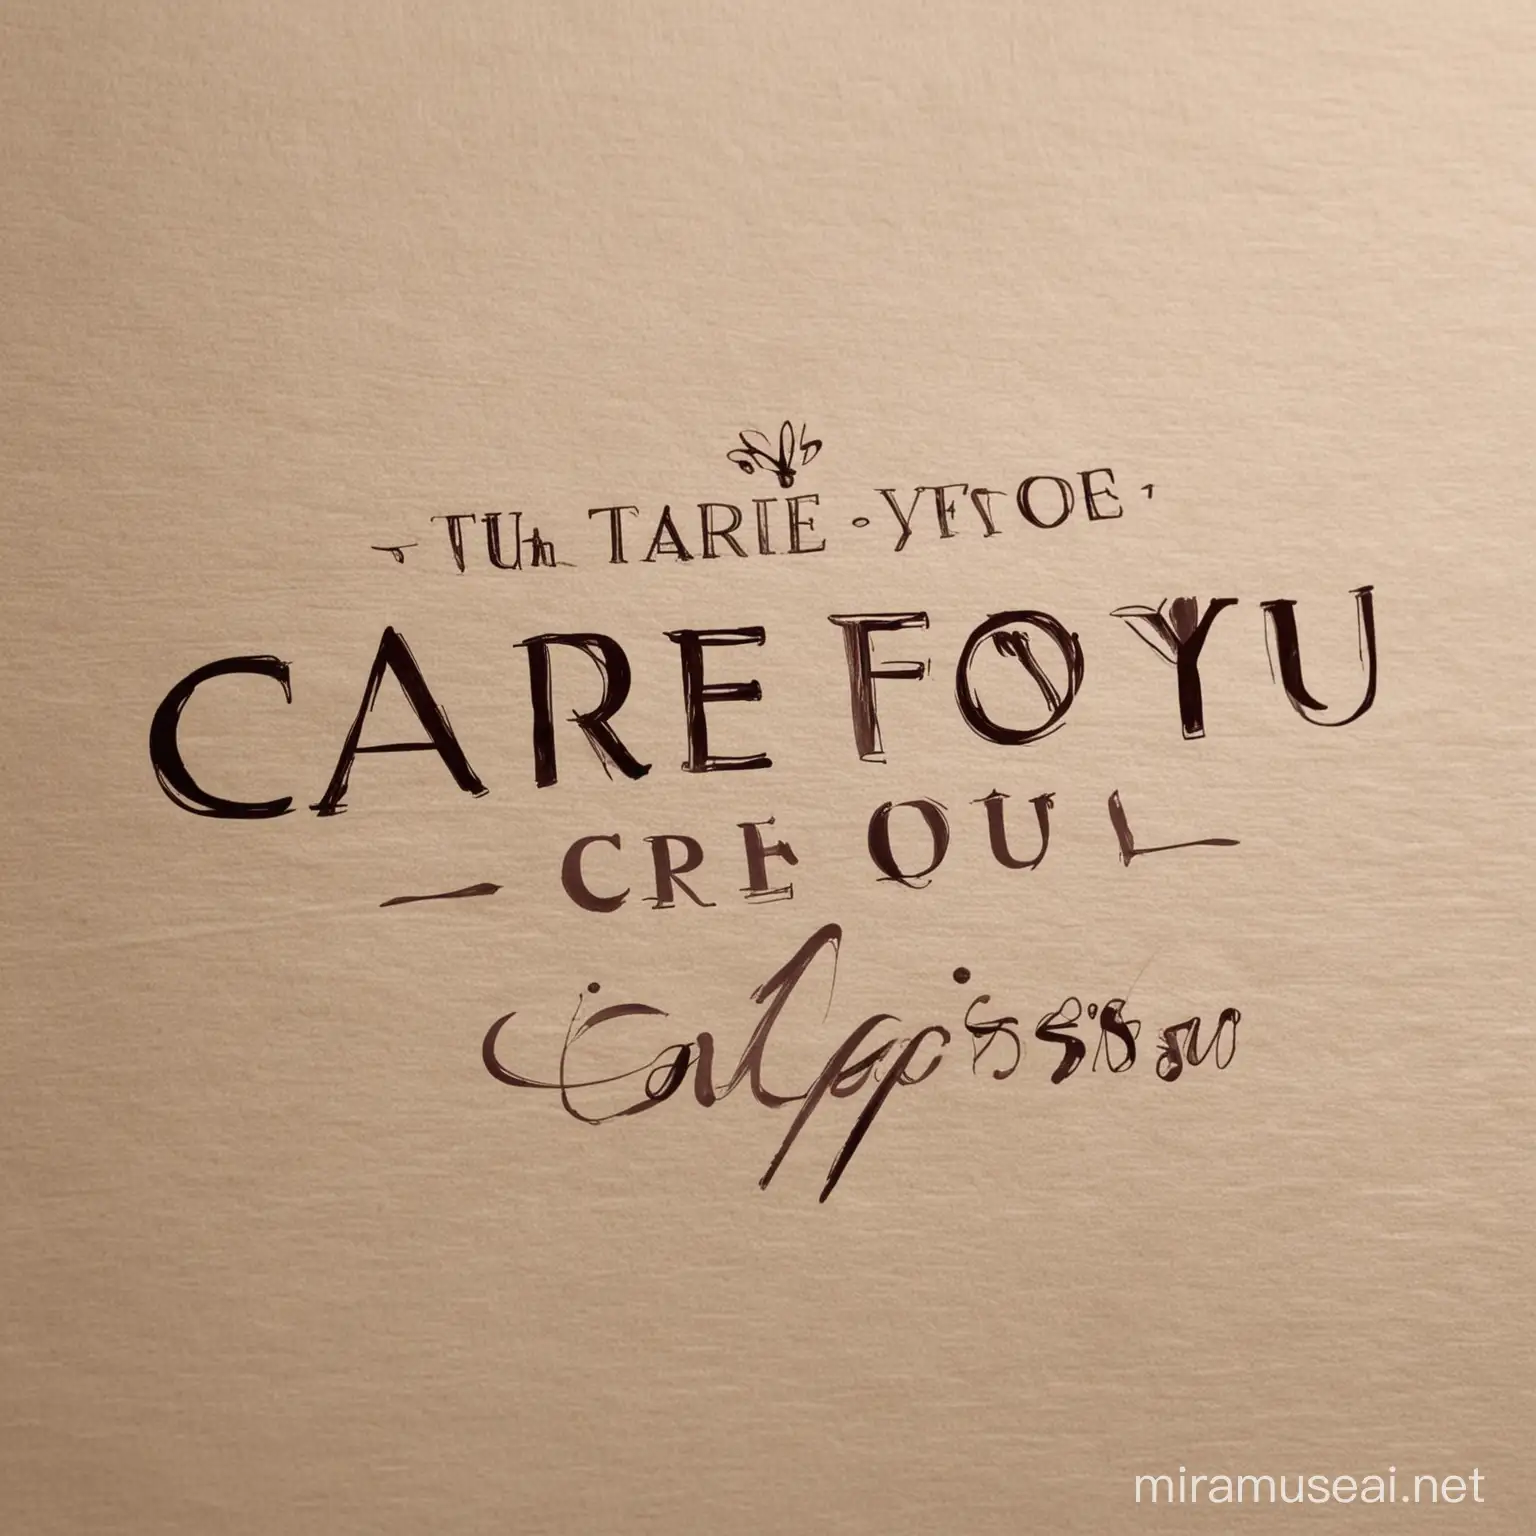 logo with the name "care for you" that the following characteristics: premium, sophistication and readability